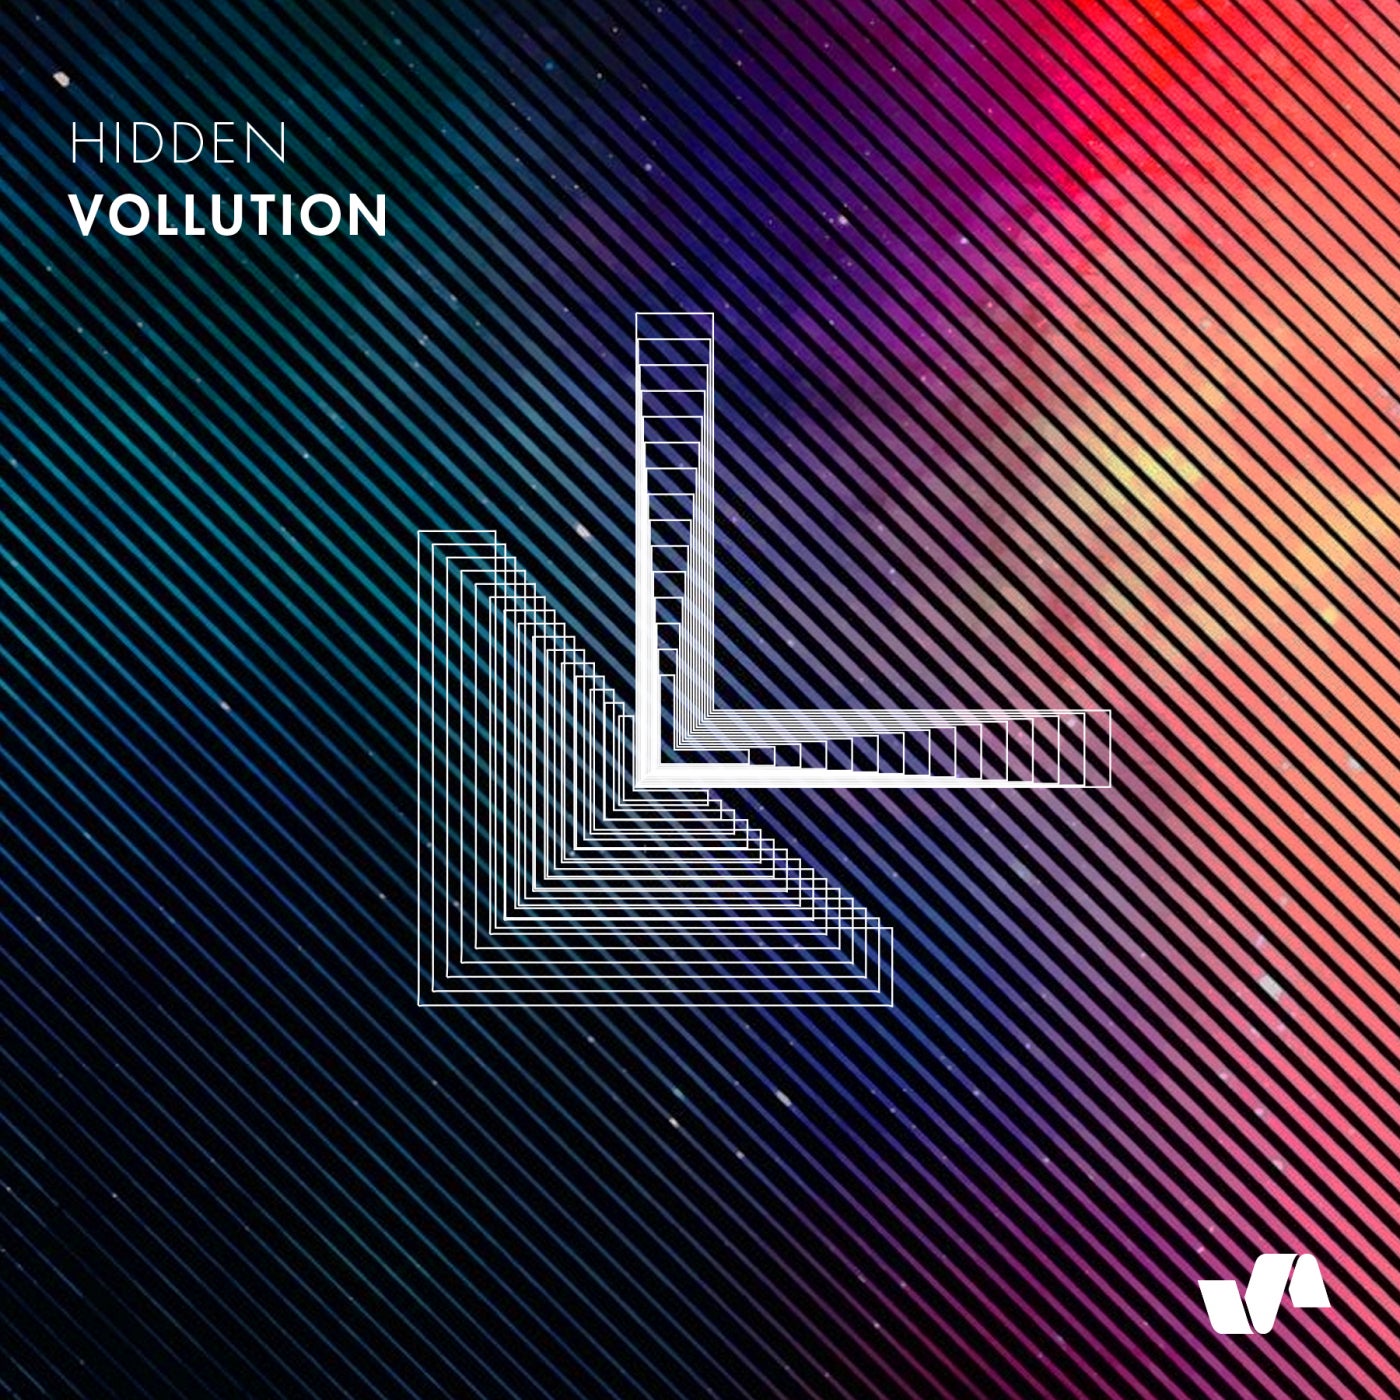 image cover: Hidden - Vollution EP / ELV167